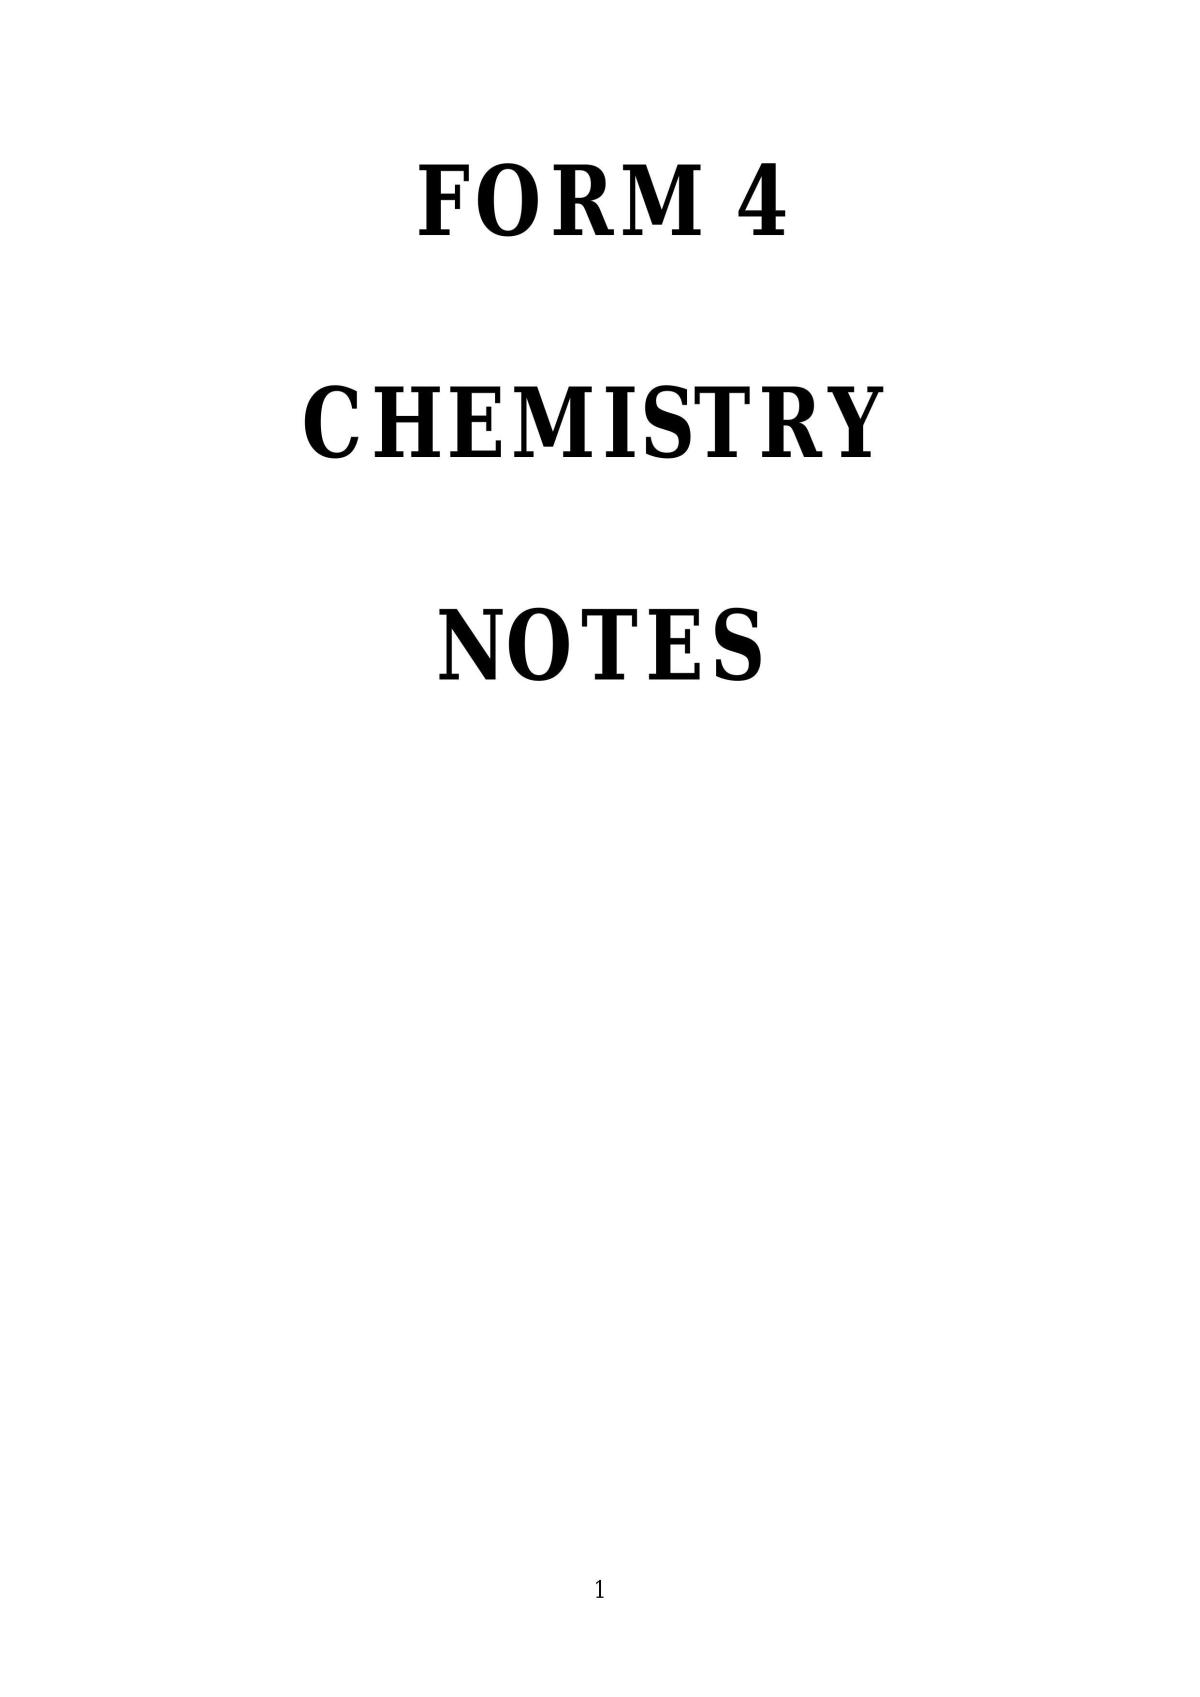 chemistry form 4 essay question and answer